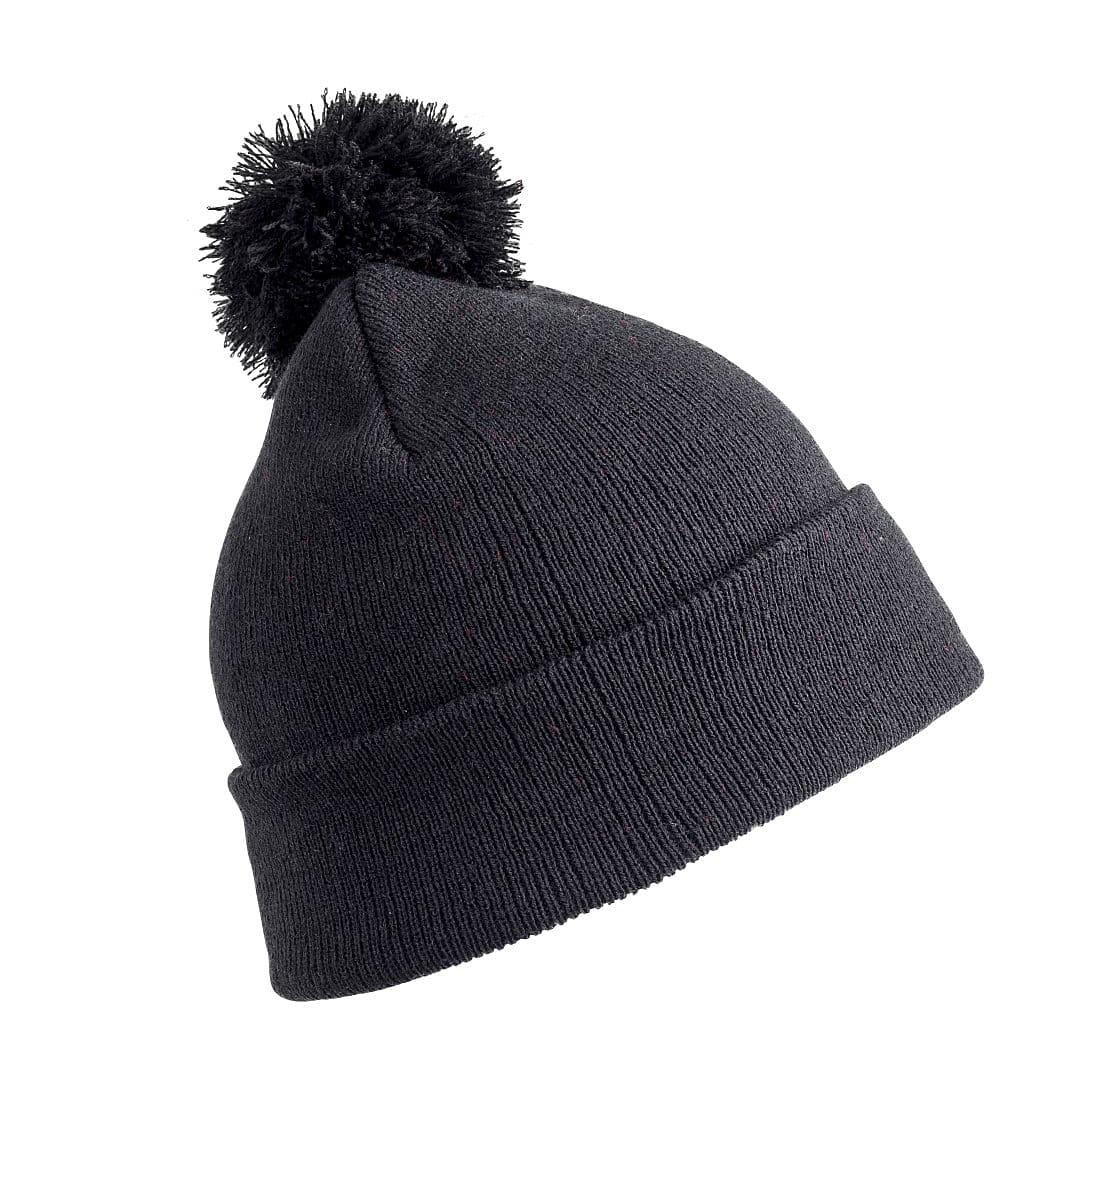 Result Winter Jr PomPom Beanie Hat in Black (Product Code: RC028J)